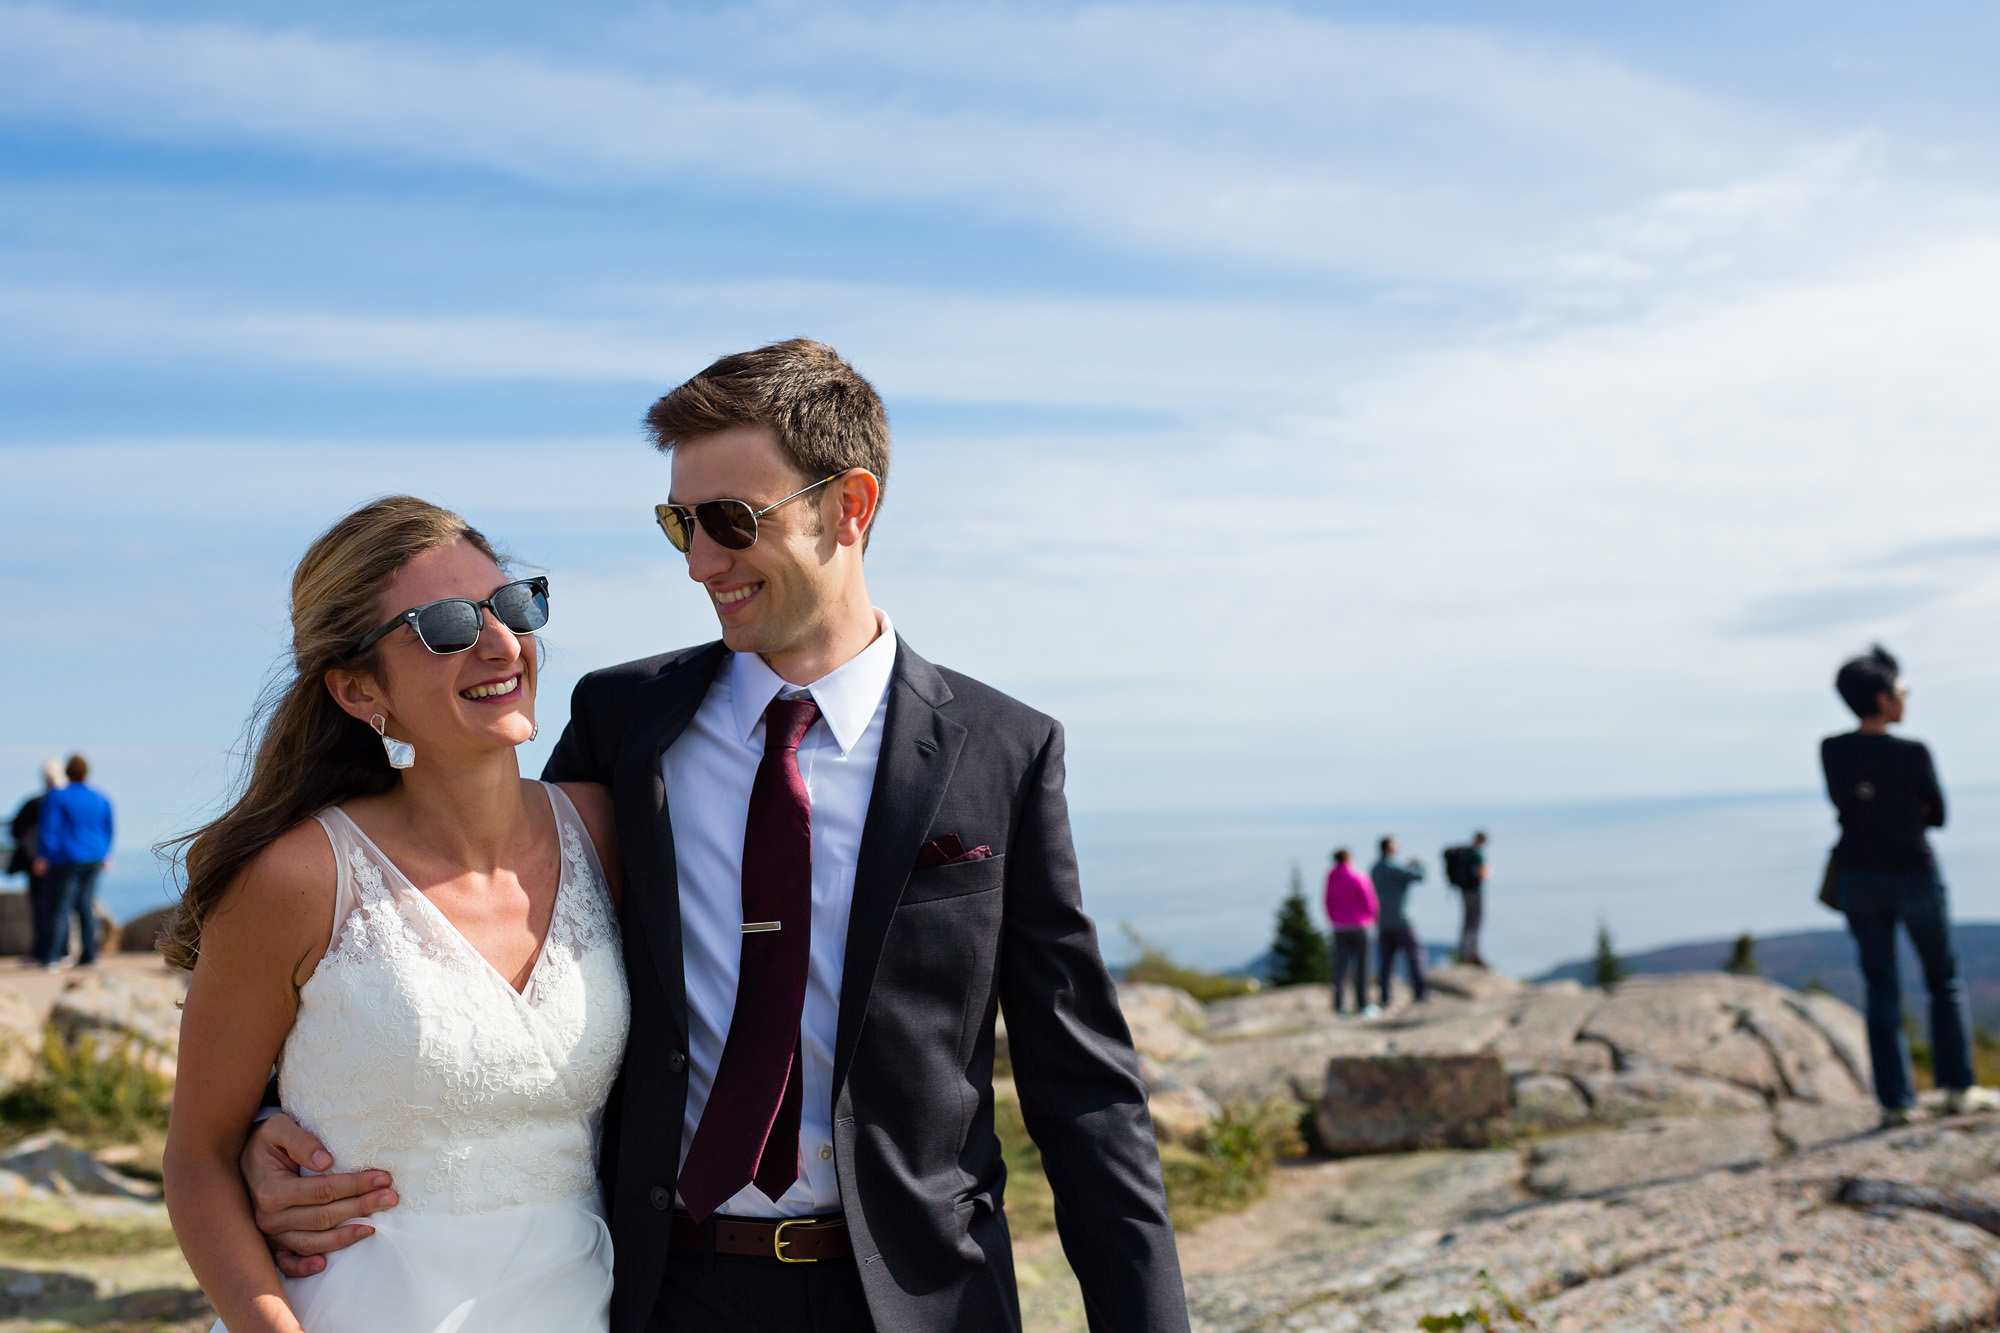 The bride and groom happily spend time on Cadillac mountain before their wedding ceremony